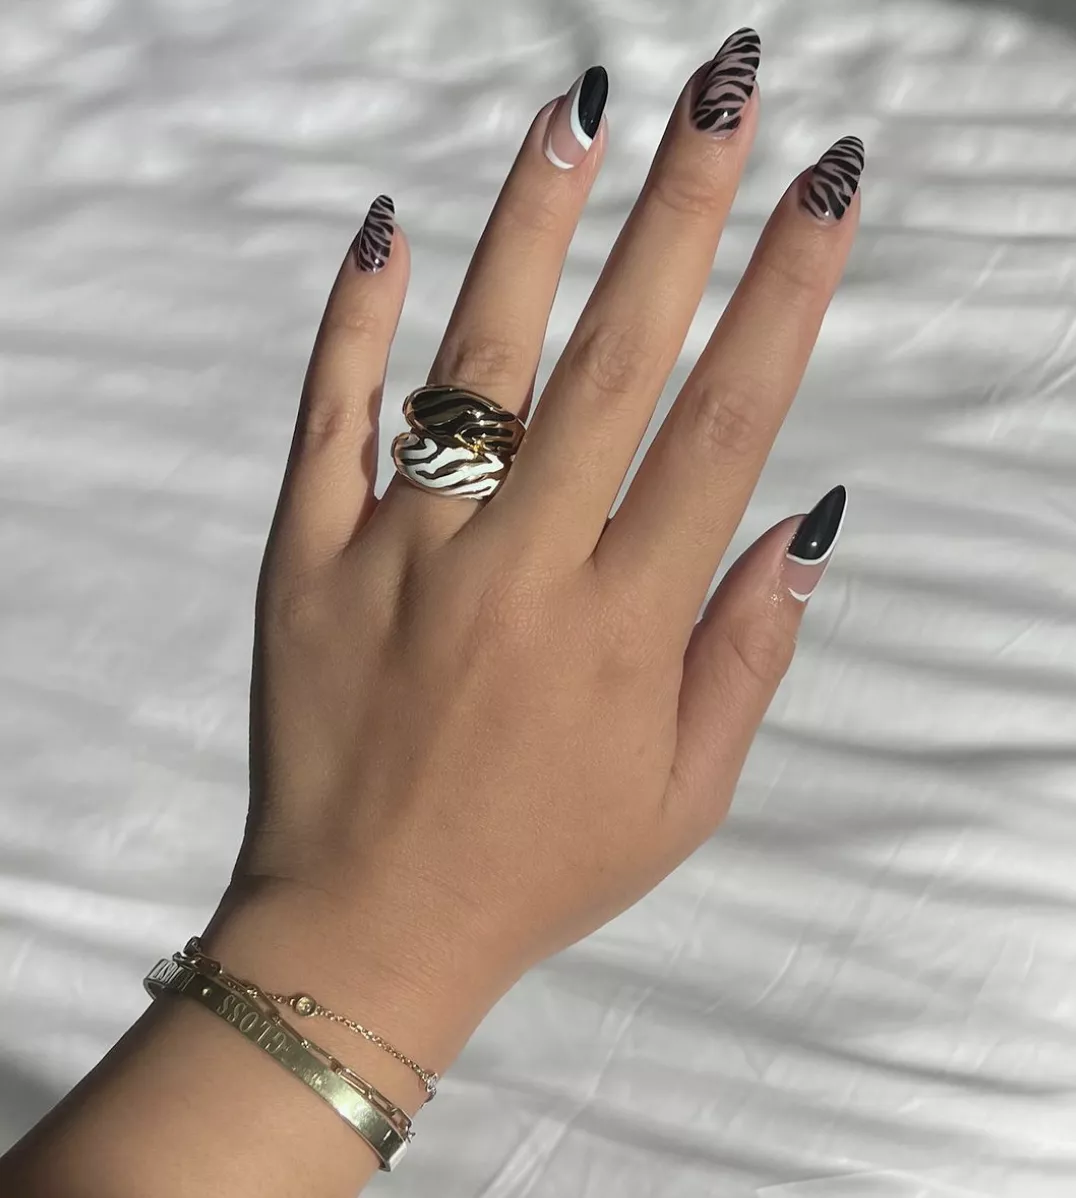 Black and white negative space nails. 